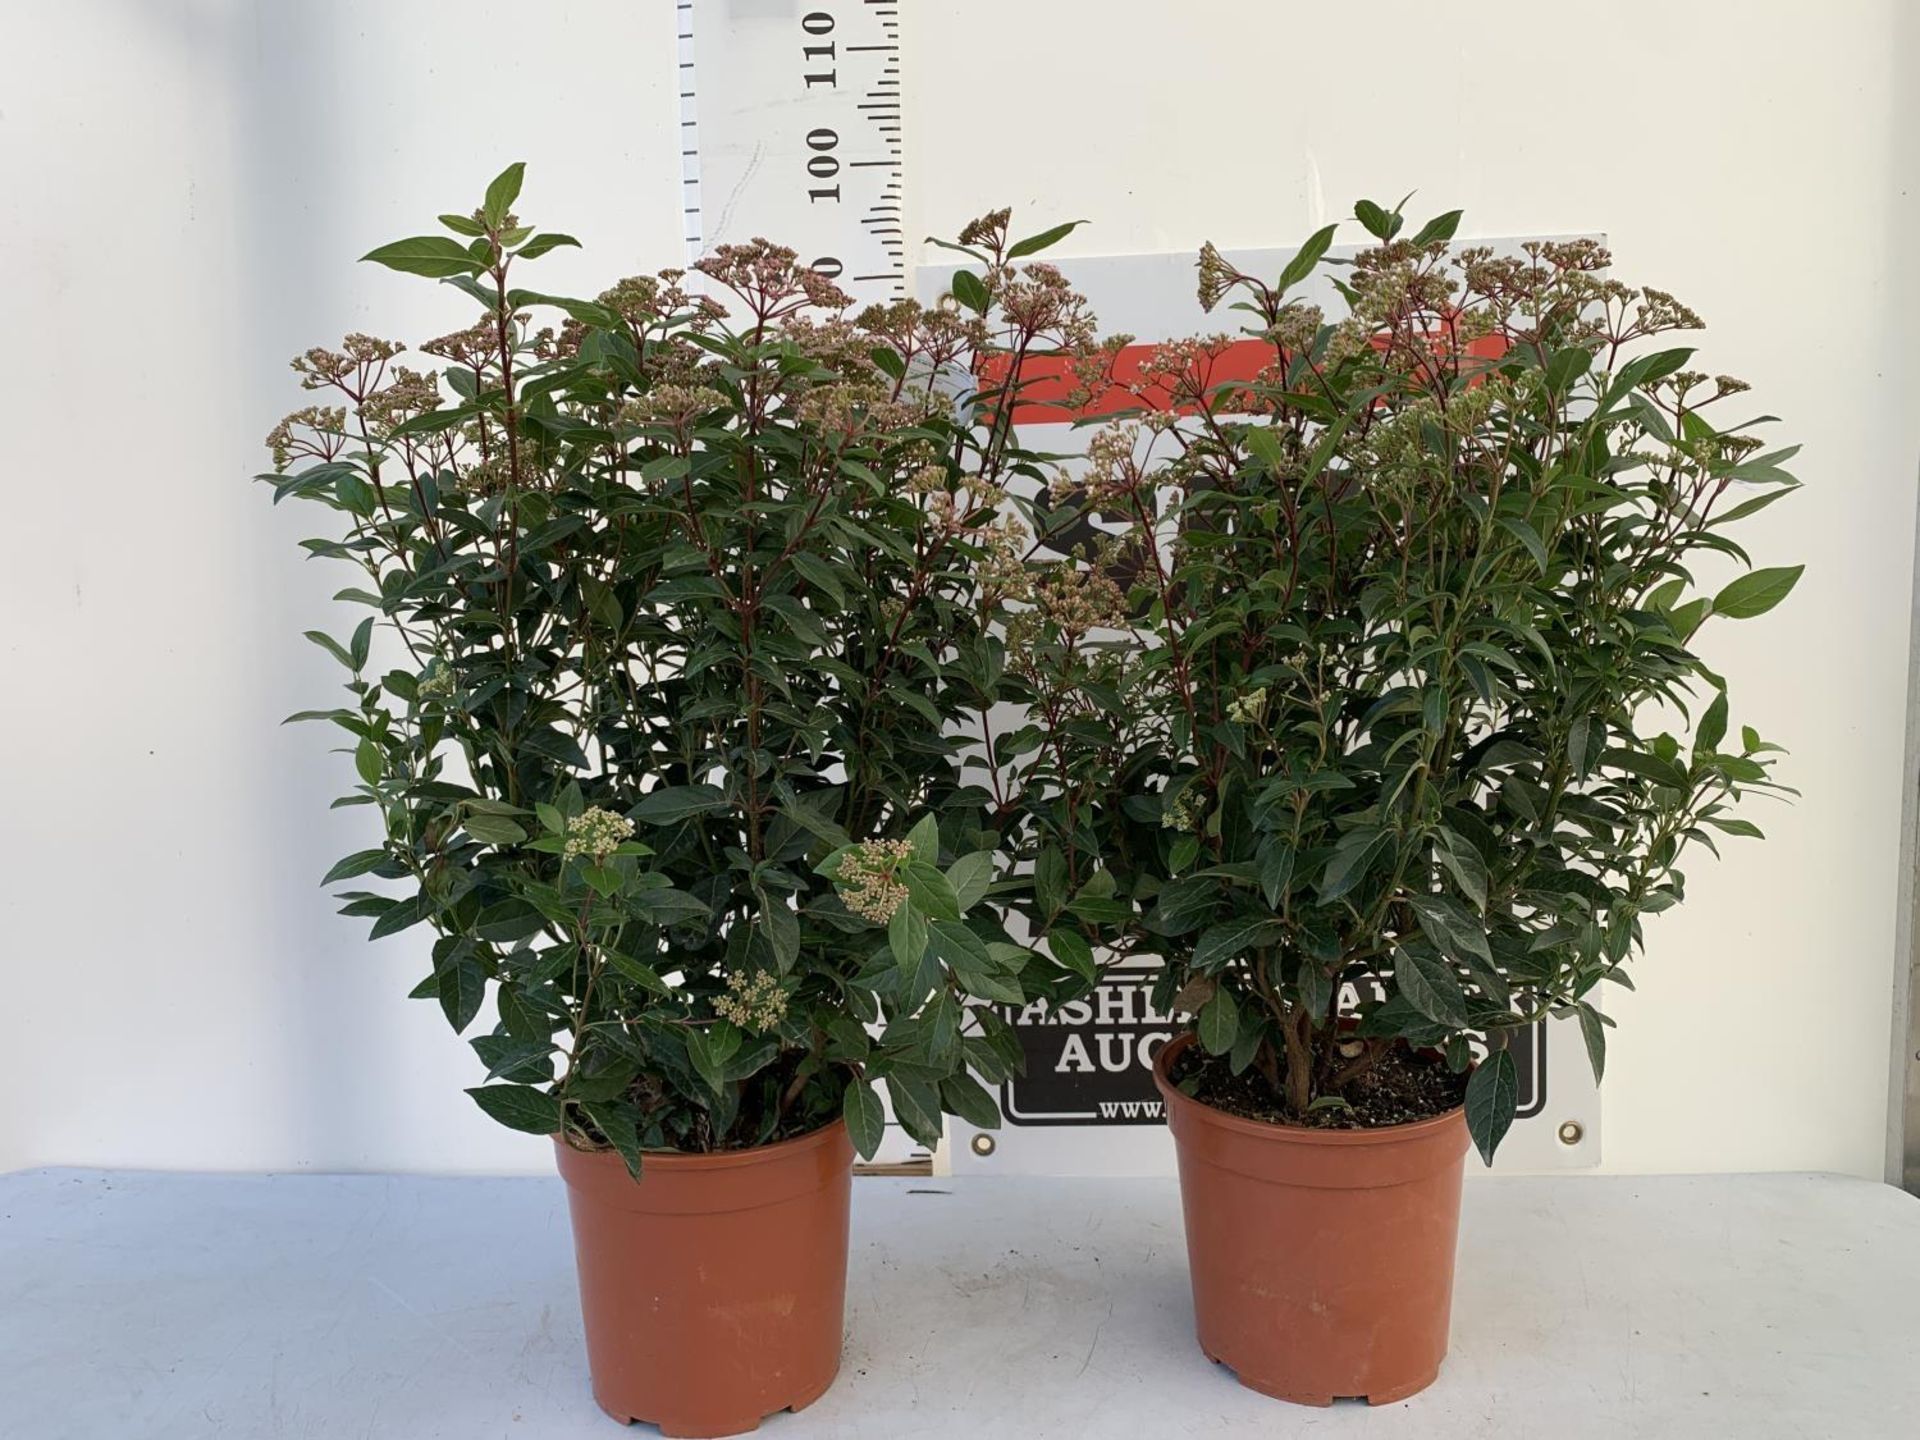 TWO LARGE VIBURNUM TINUS SPIRIT BUSHES APPROX 85CM IN HEIGHT IN 7LTR POTS PLUS VAT TO BE SOLD FOR